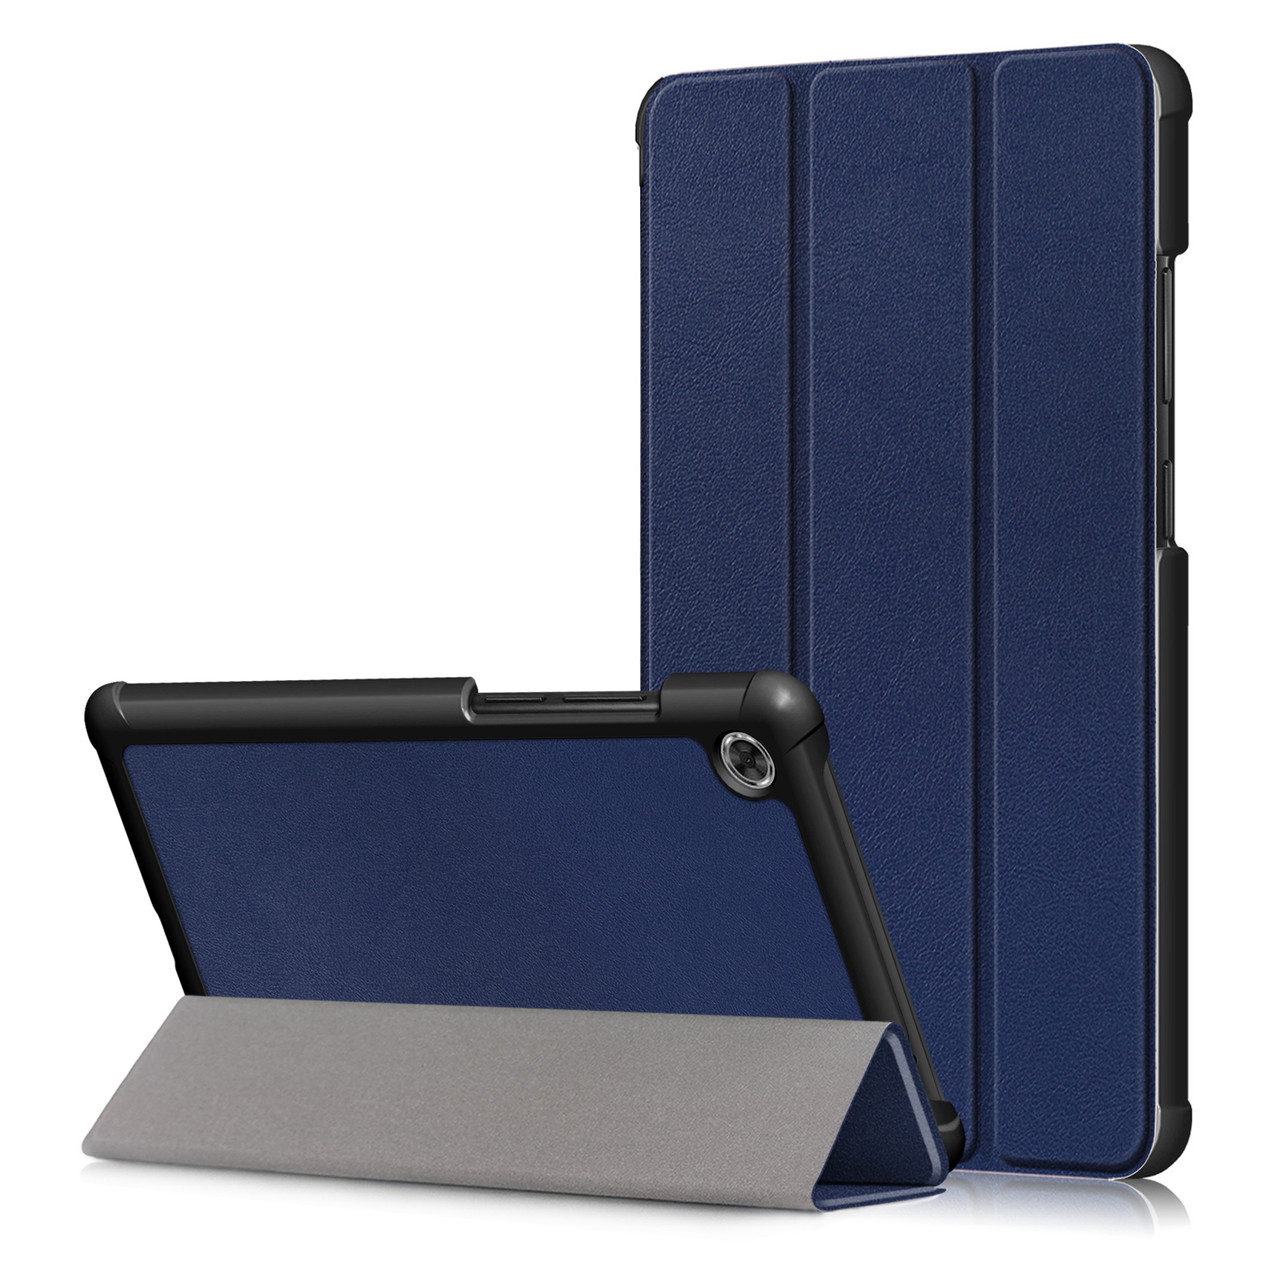 Lenovo Tab M8 HD FHD 1st 2nd Gen PU Leather Case Cover TB-8505 8